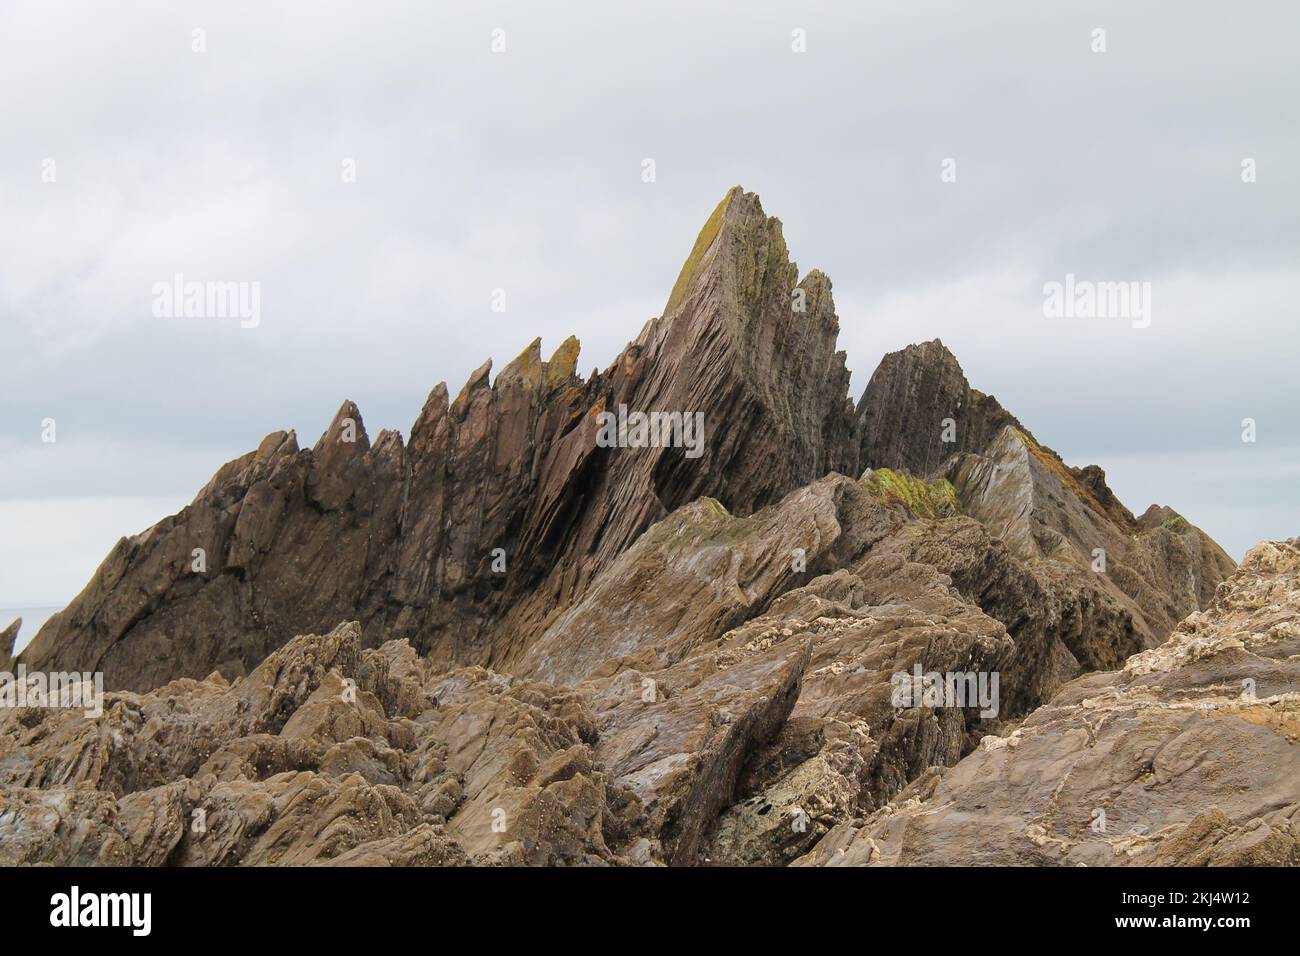 Dramatic Rock Formations on a Coastal Cliff. Stock Photo